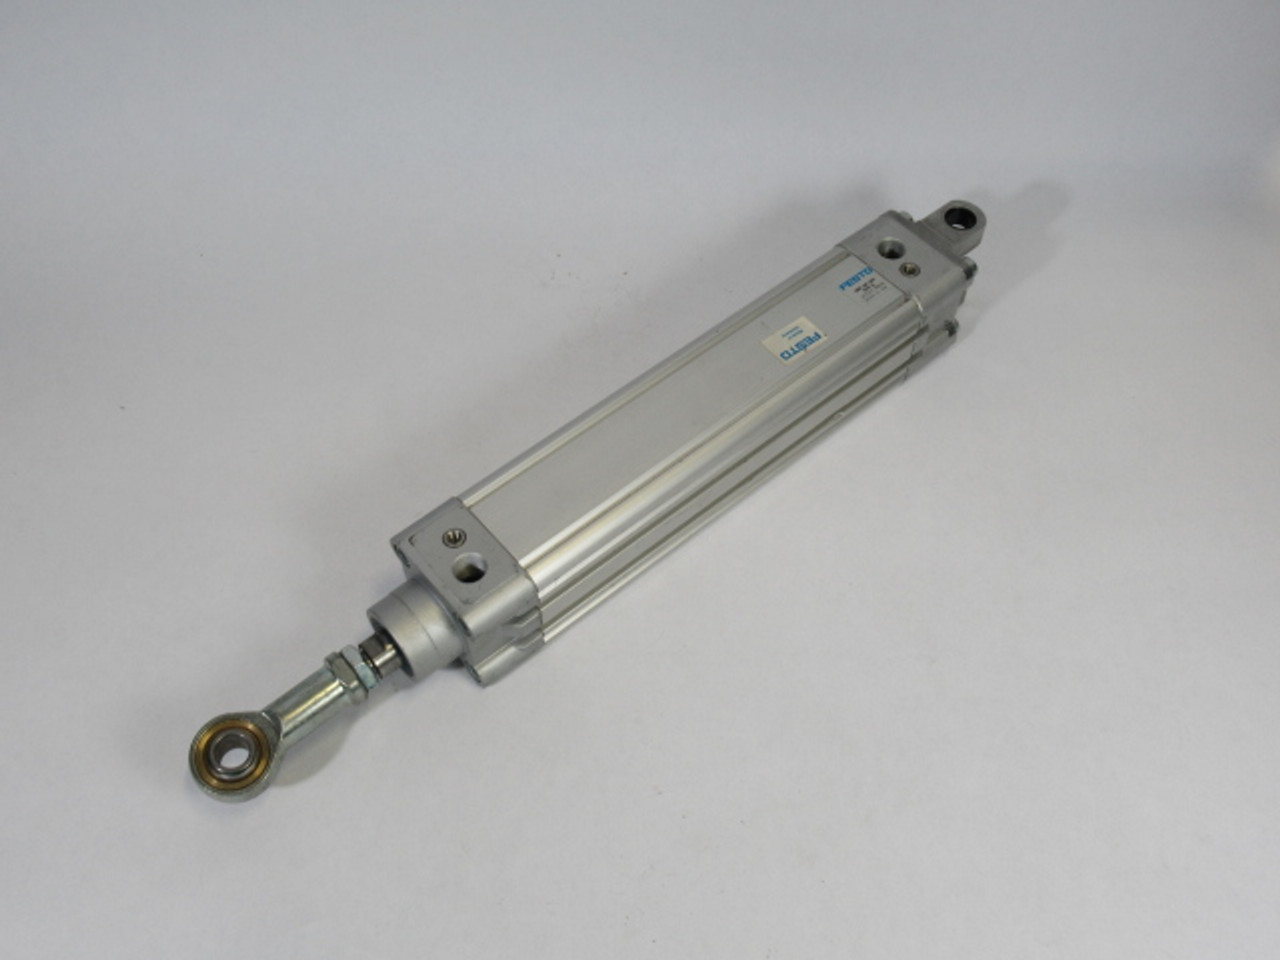 Festo 163343 DNC-40-160-PPV-A Pneumatic Cylinder 40mm Bore 160mm Stroke USED